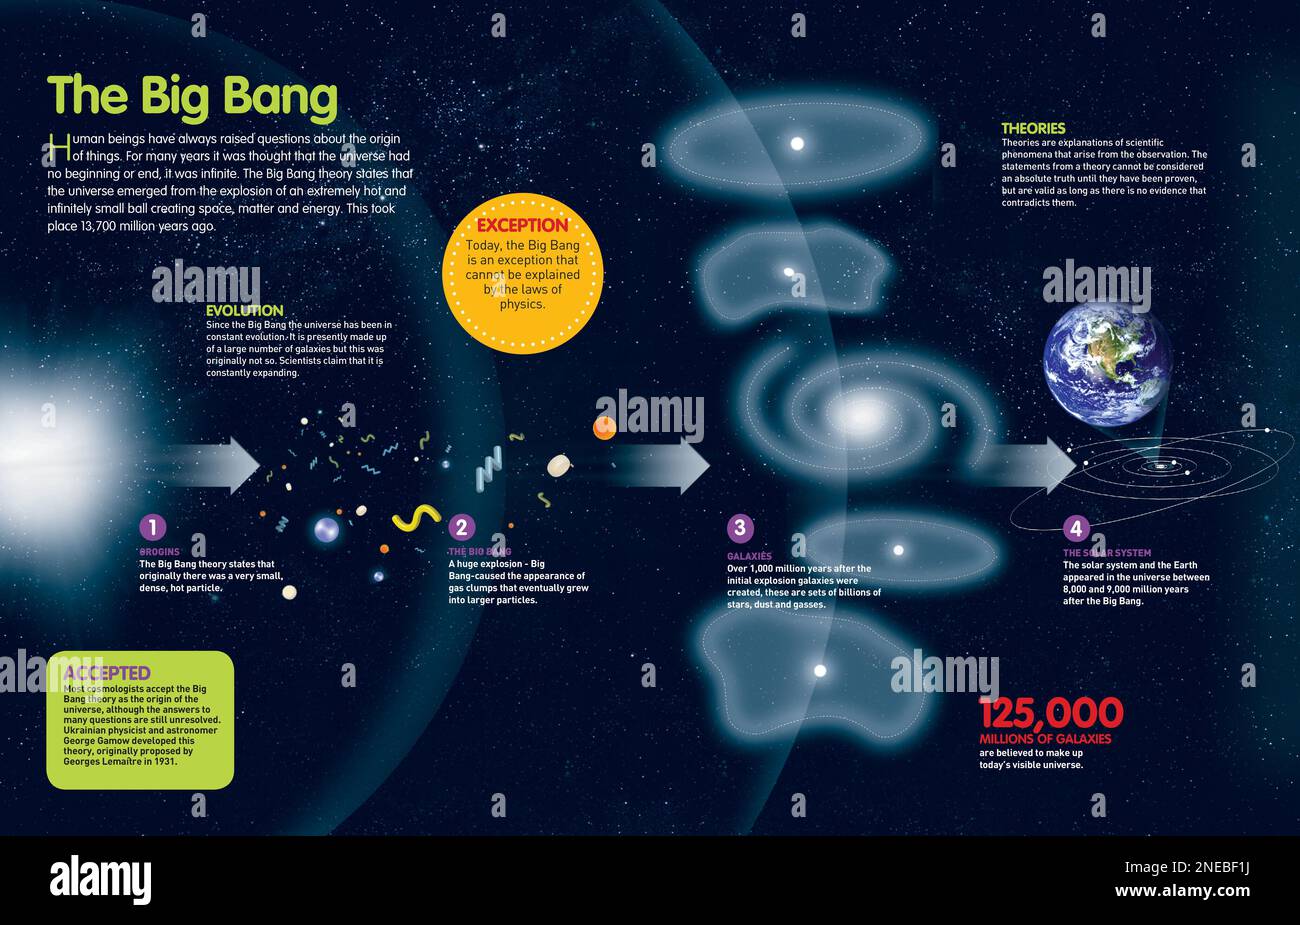 Infographic about the theory of the Big Bang that gave birth to the universe, and the evolution of it until the formation of galaxies and the solar system. [QuarkXPress (.qxp); Adobe InDesign (.indd); 4960x3188]. Stock Photo